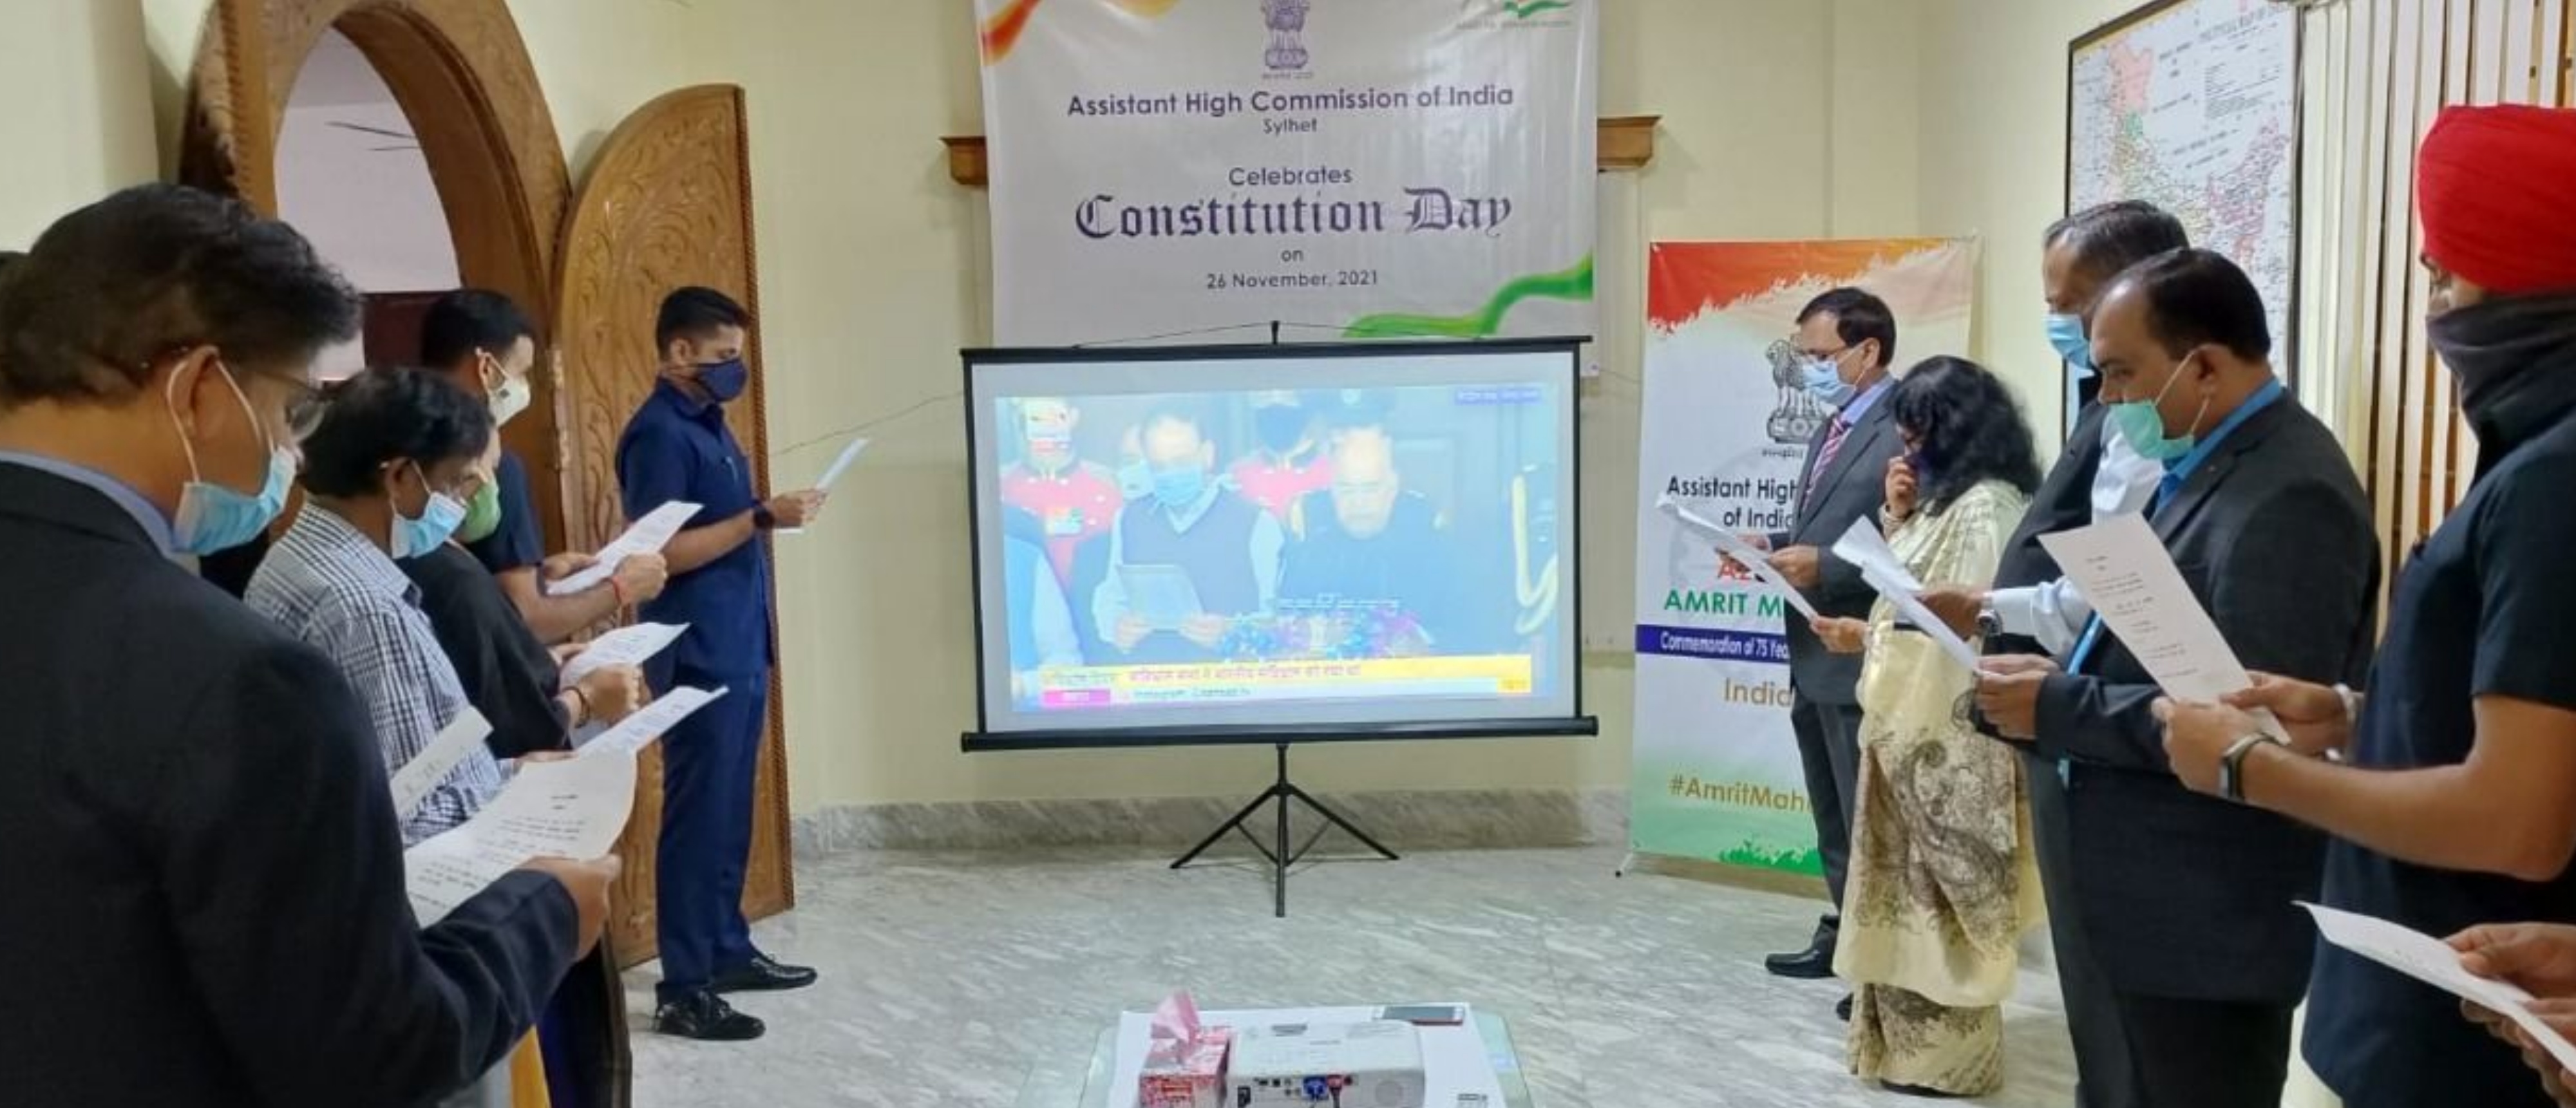  On the occasion of Constitution Day, members of AHCI Sylhet read the Preamble live along with Hon'ble President of India - 26.11.2021